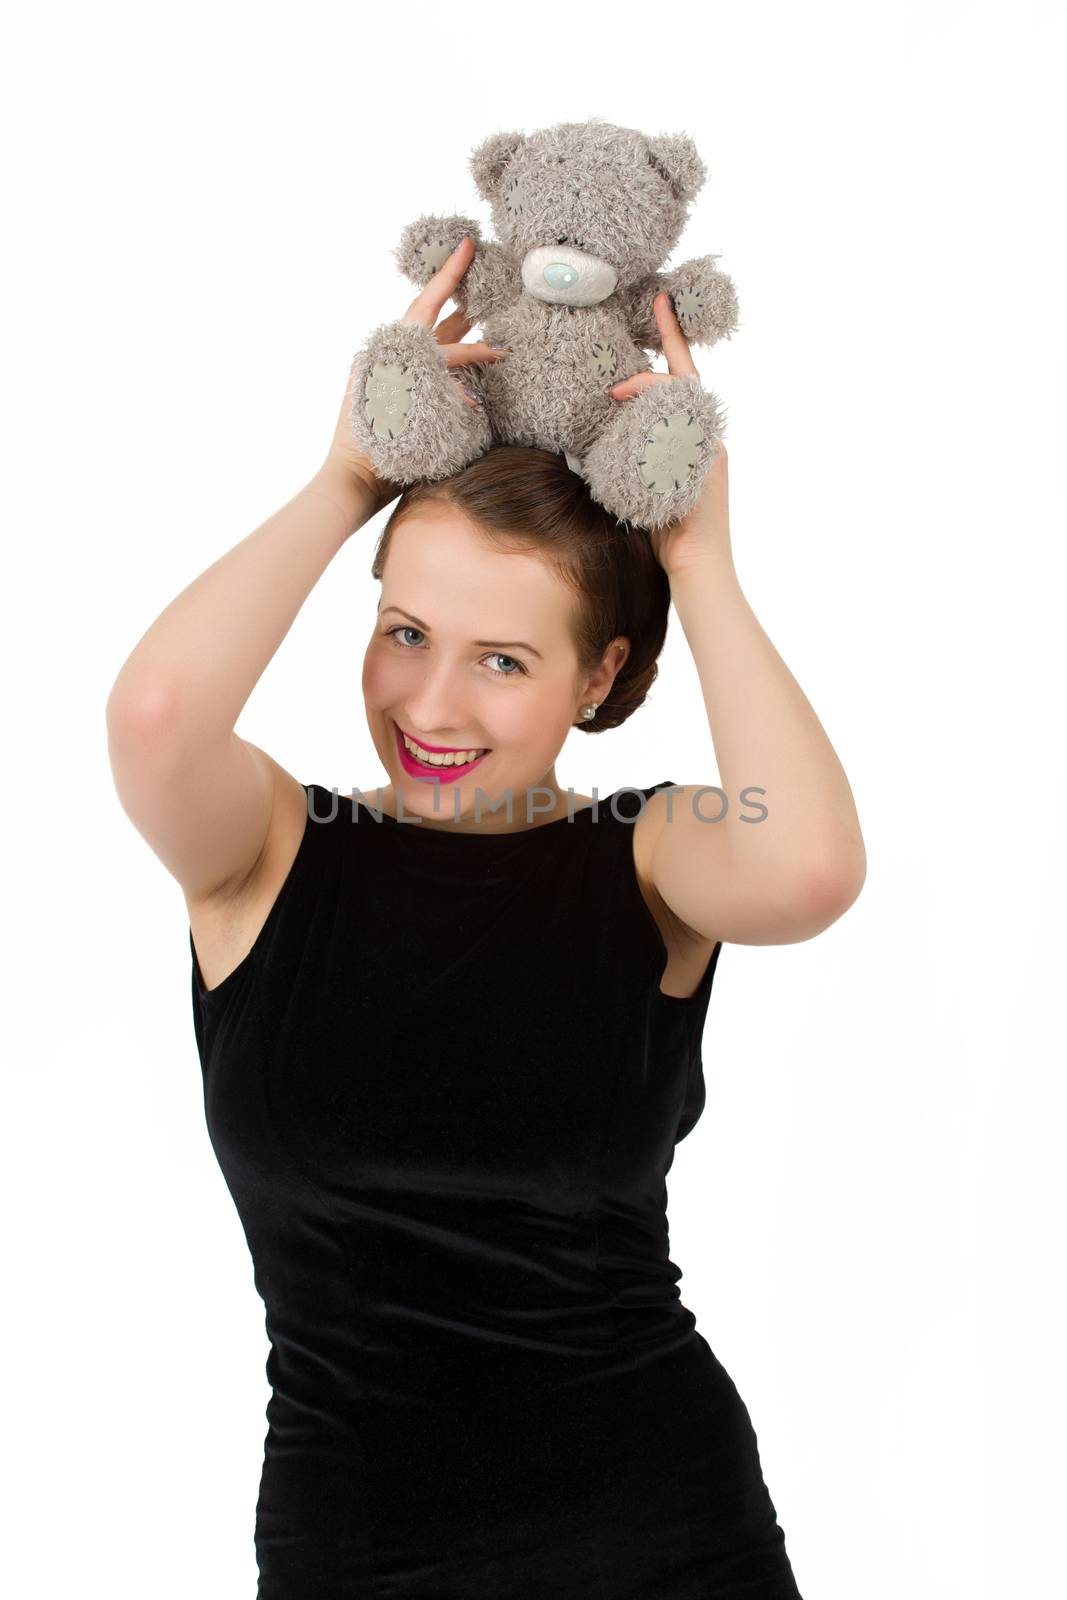 attractive smiling brunette holding teddy bear in a black dress and smiling